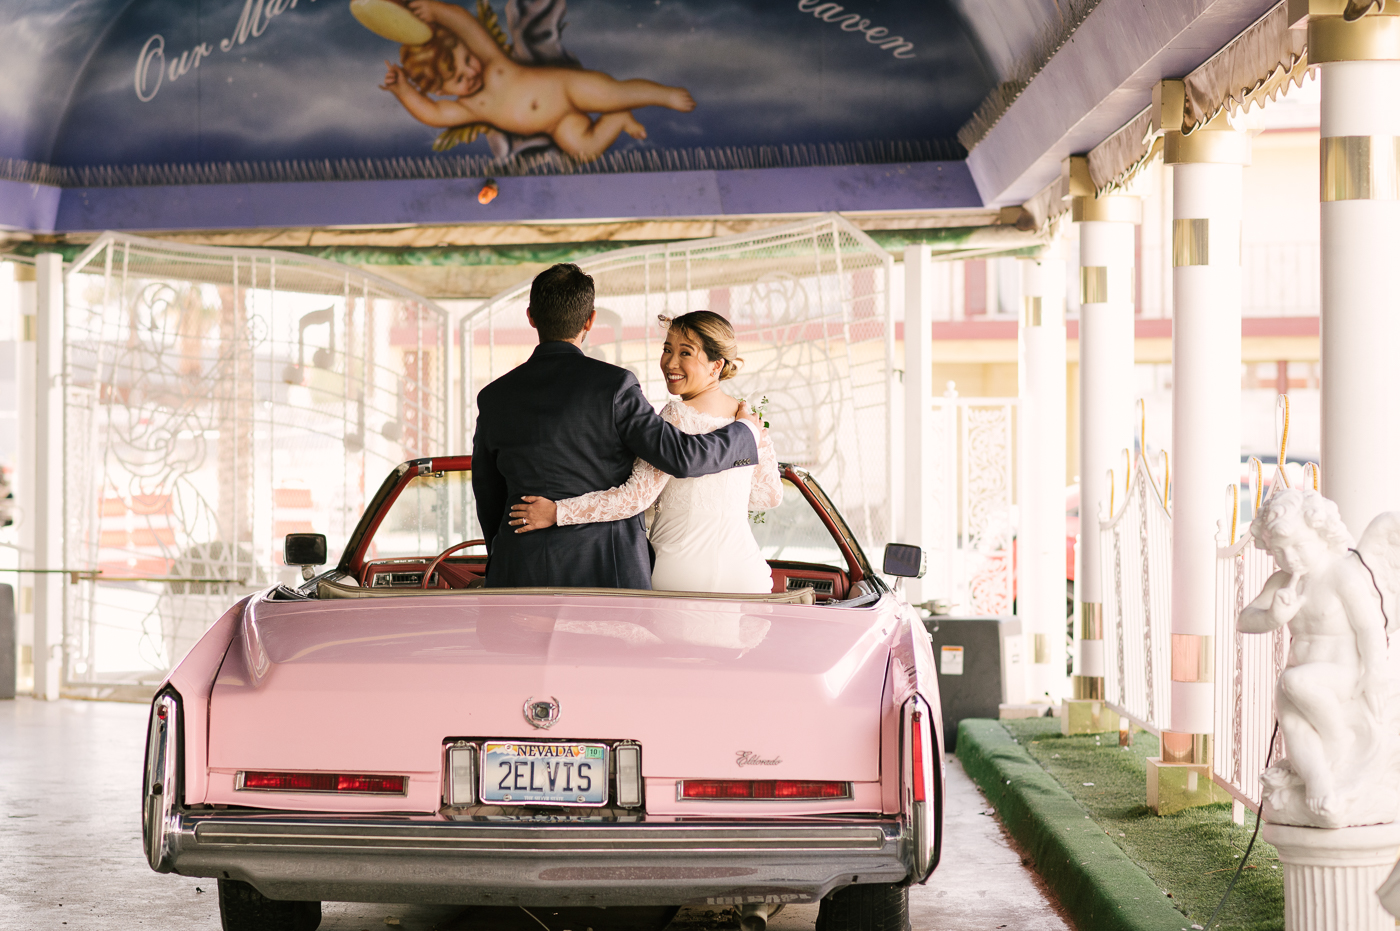 Newlyweds on sitting on the back of the famous Elvis Presley's pink Cadillac with their arms around each other while the bride looks back and smiles.